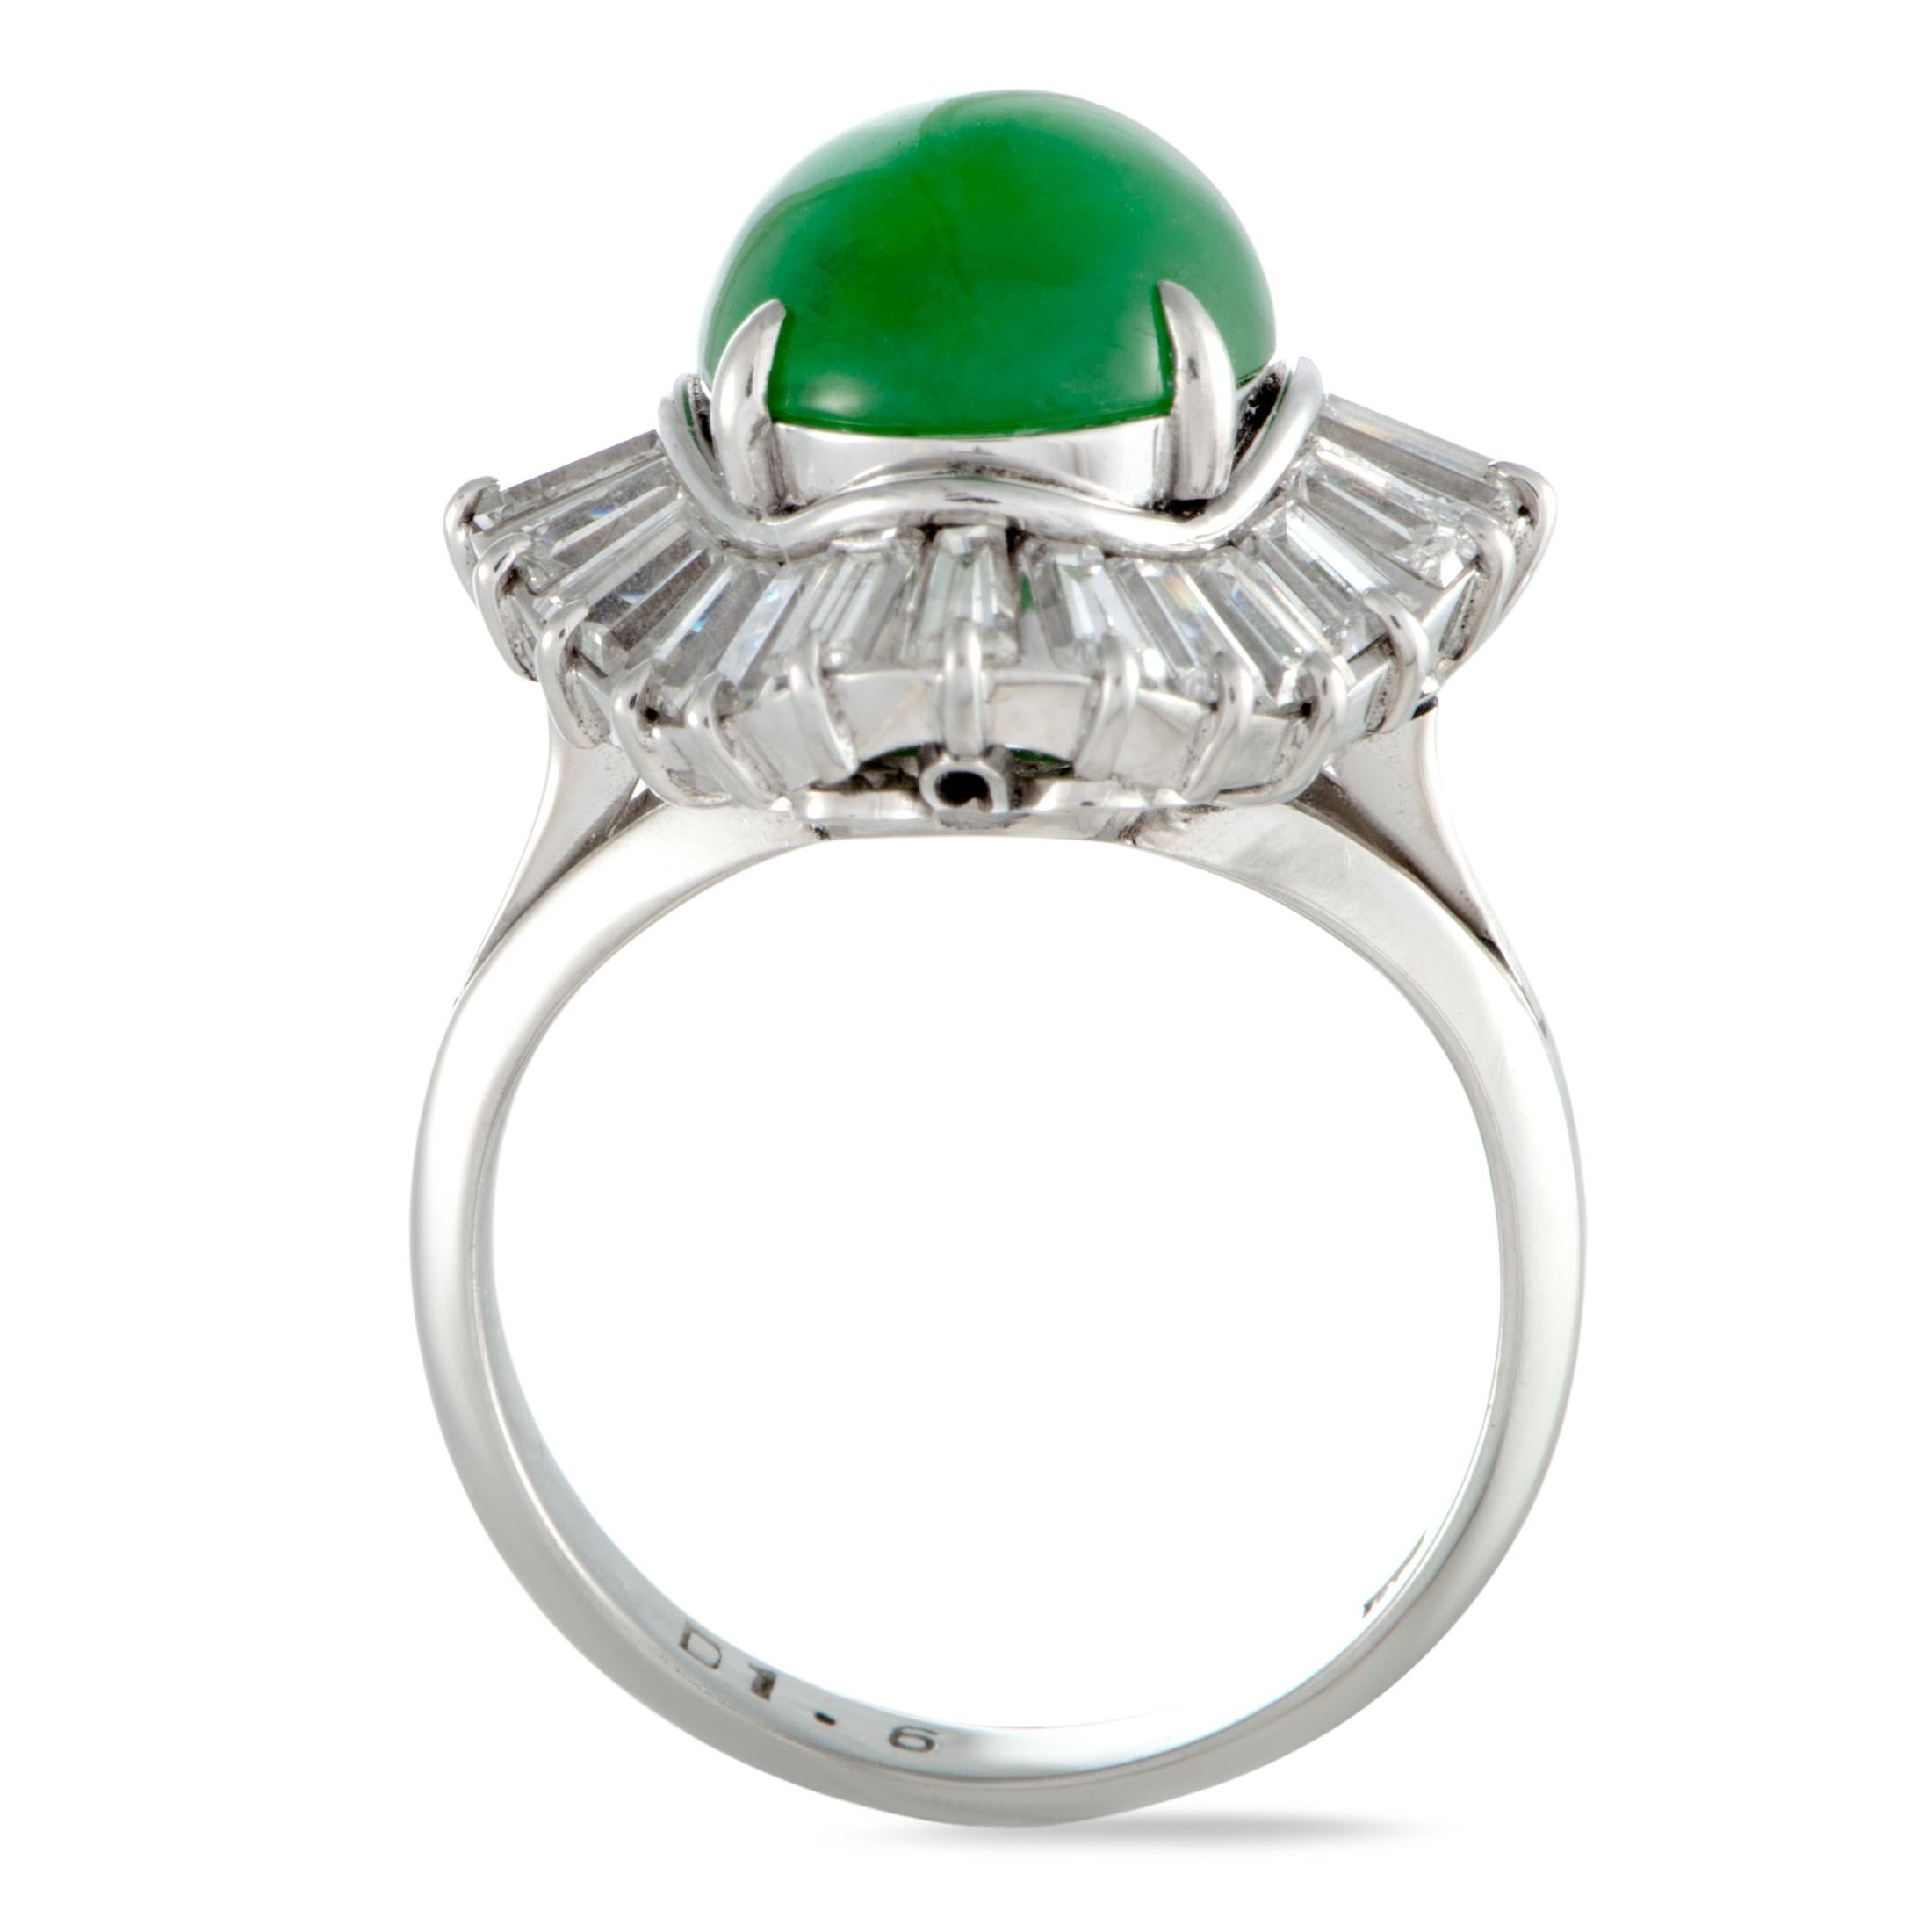 The inherent visual appeal and renowned classic elegance of the perfectly smooth green jade is brilliantly countered by the mesmerizing presence of the exquisitely cut diamonds weighing in total 1.60 carats in this remarkably tasteful platinum